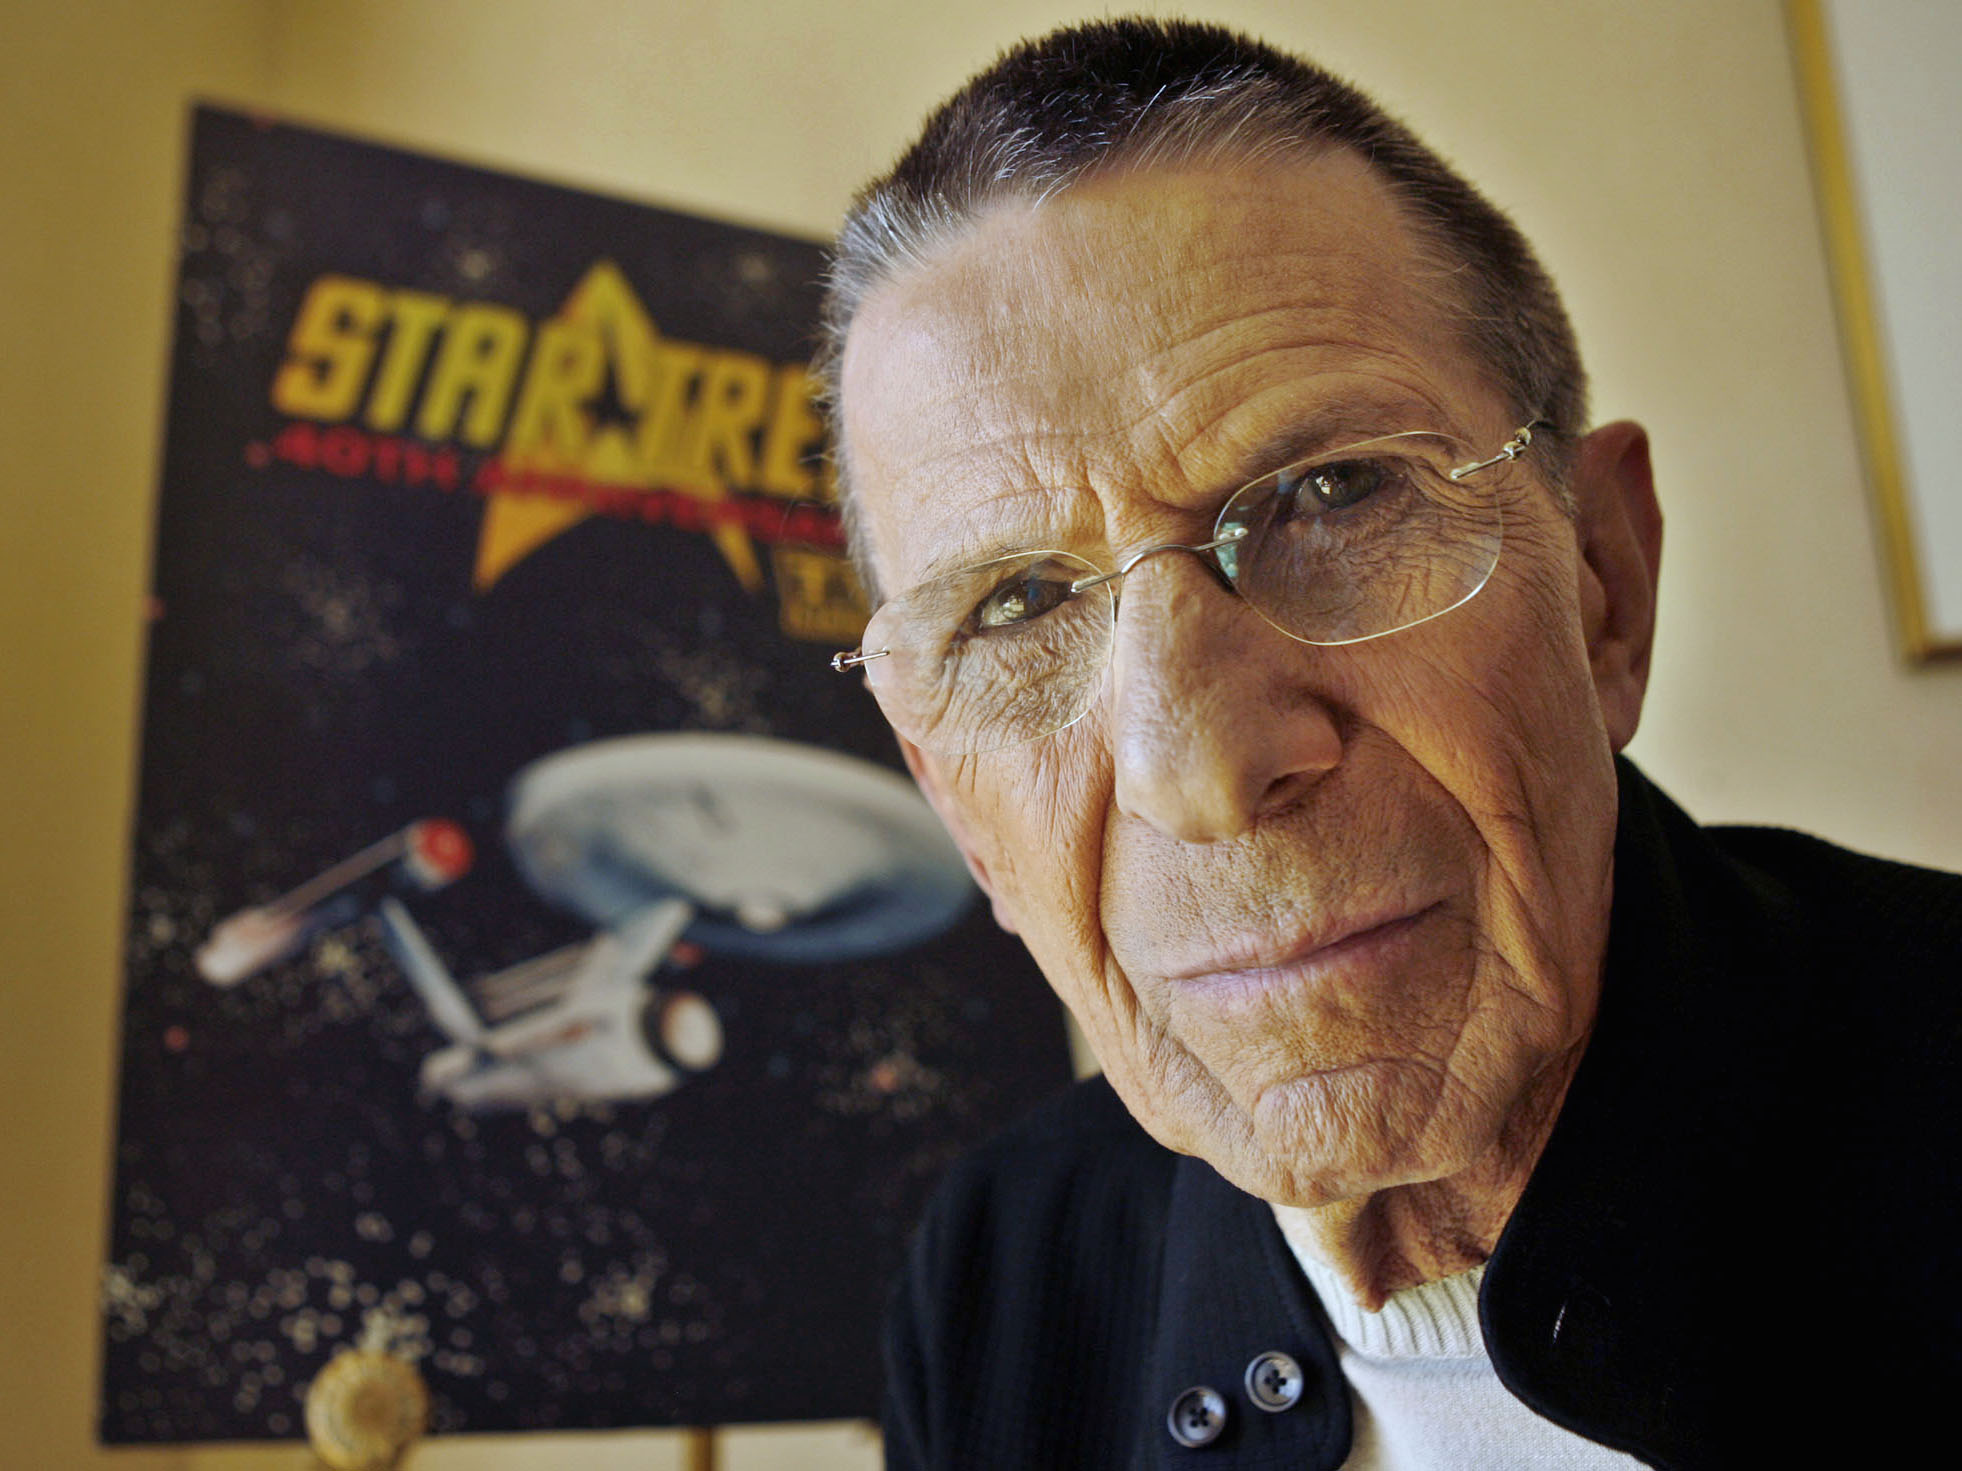 In this Aug. 9, 2006, file photo, actor Leonard Nimoy poses for a photograph in Los Angeles. Nimoy, famous for playing officer Mr. Spock in “Star Trek” died Friday, Feb. 27, 2015 in Los Angeles of end-stage chronic obstructive pulmonary disease. He was 83. AP PHOTO/RIC FRANCIS 